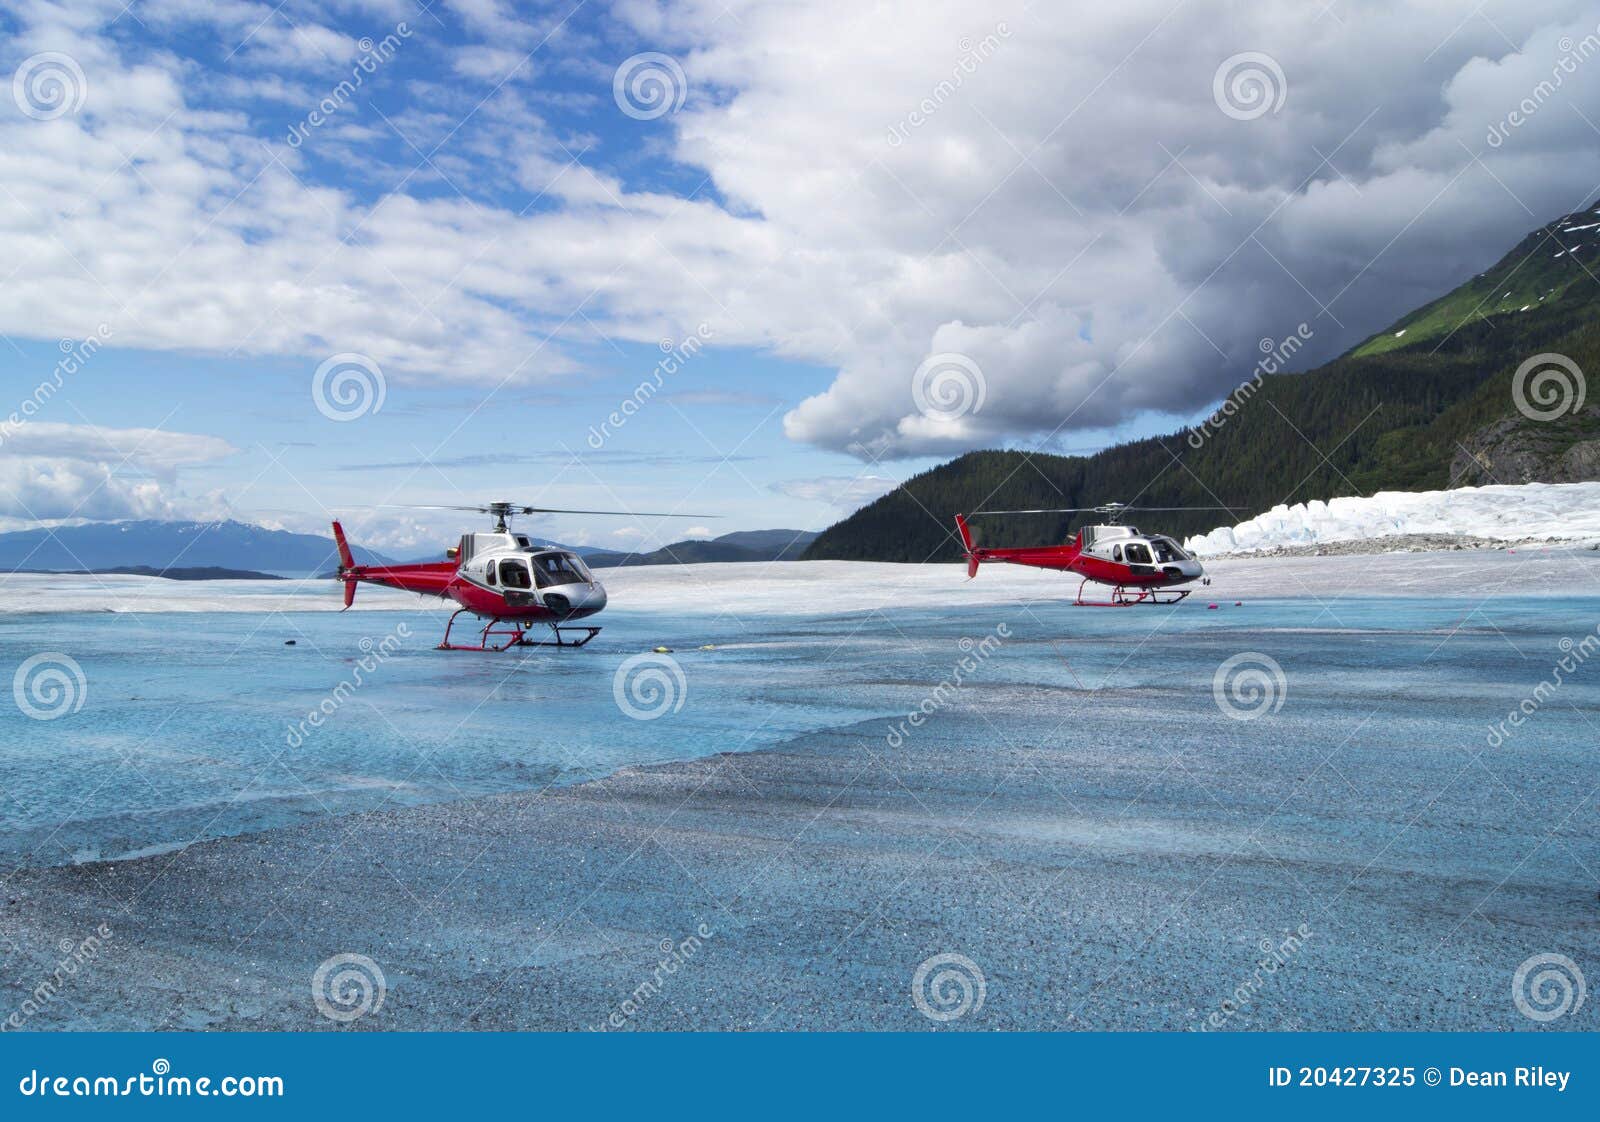 helicopters on a glacier